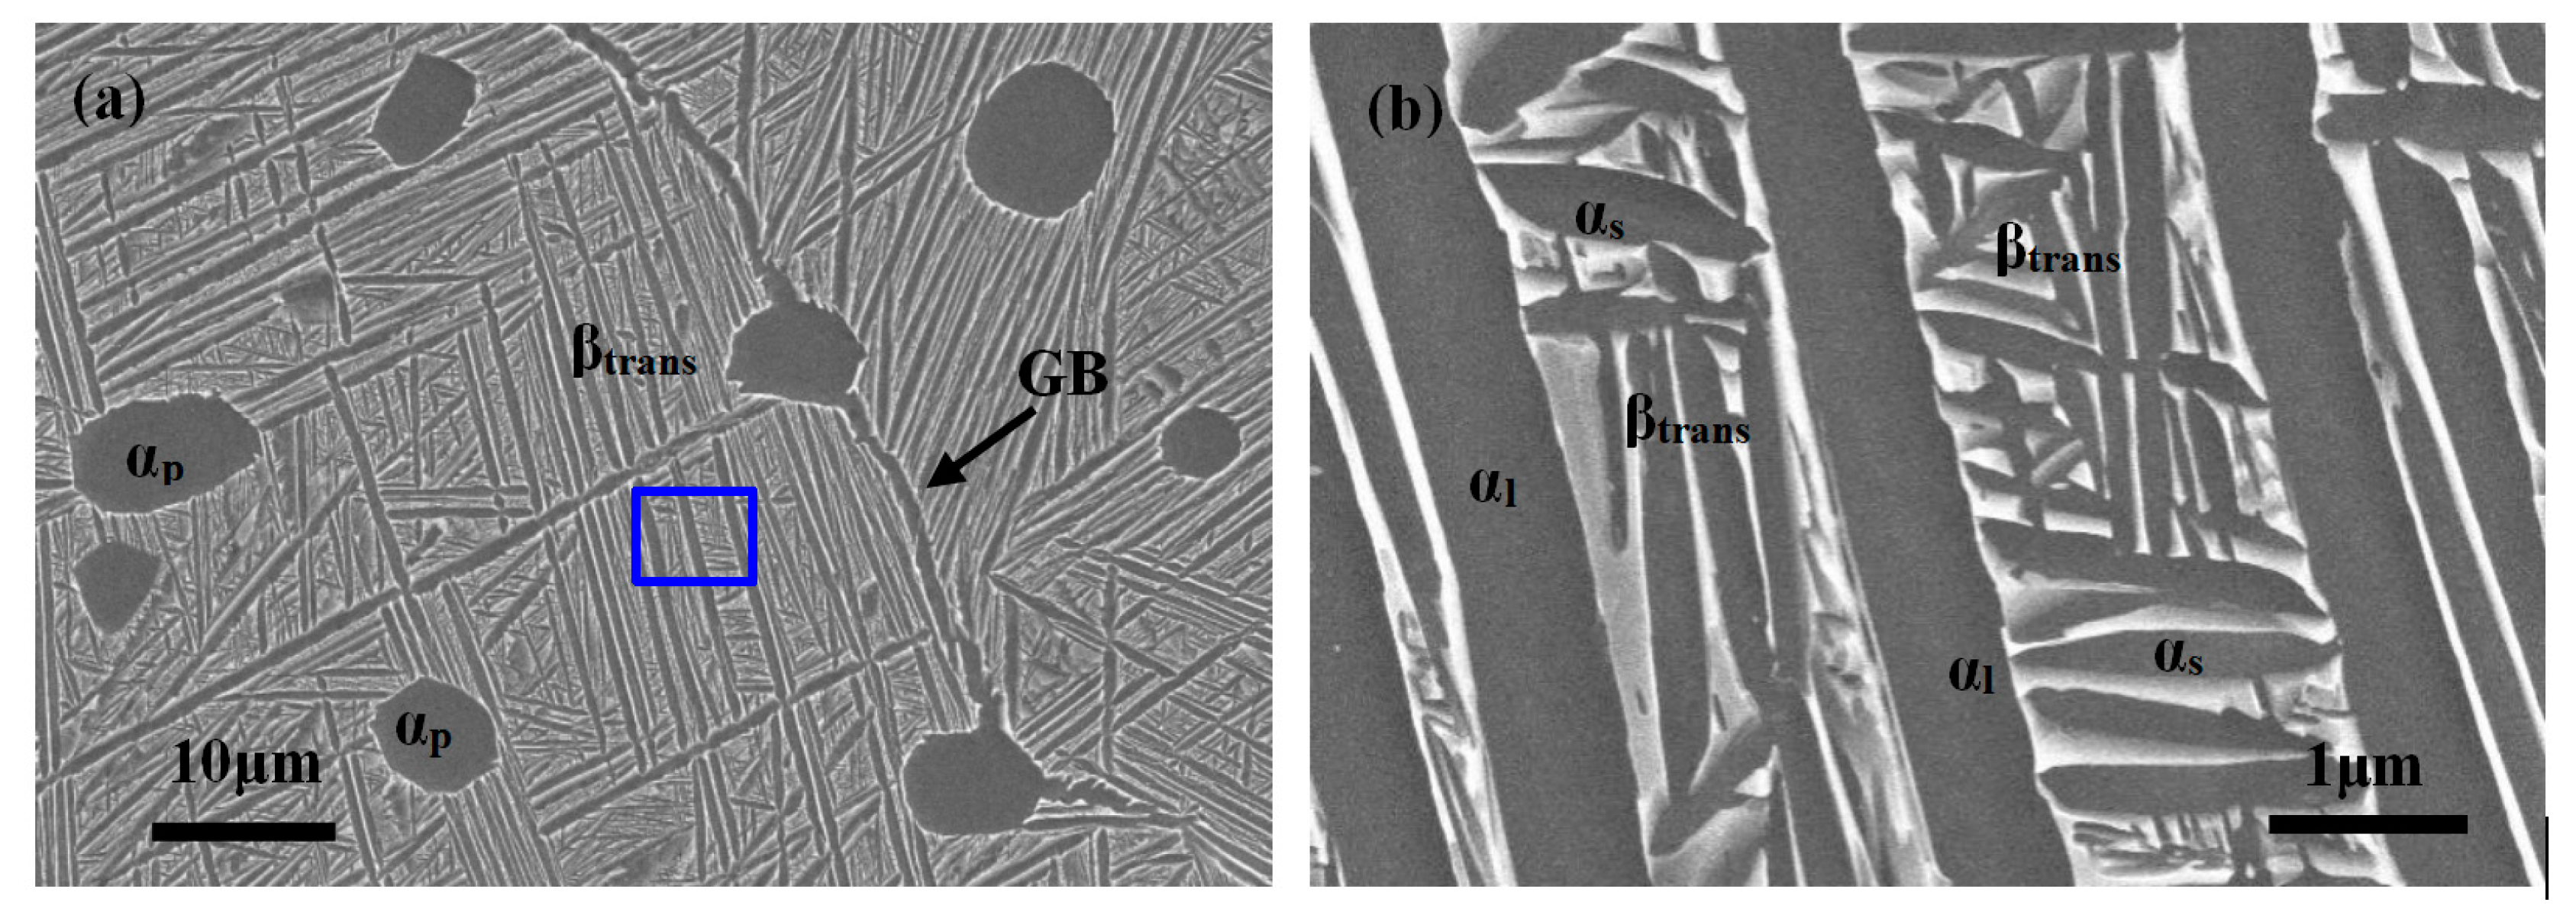 Metals | Free Full-Text | Improvement of the Crack Propagation Resistance  in an α + β Titanium Alloy with a Trimodal Microstructure